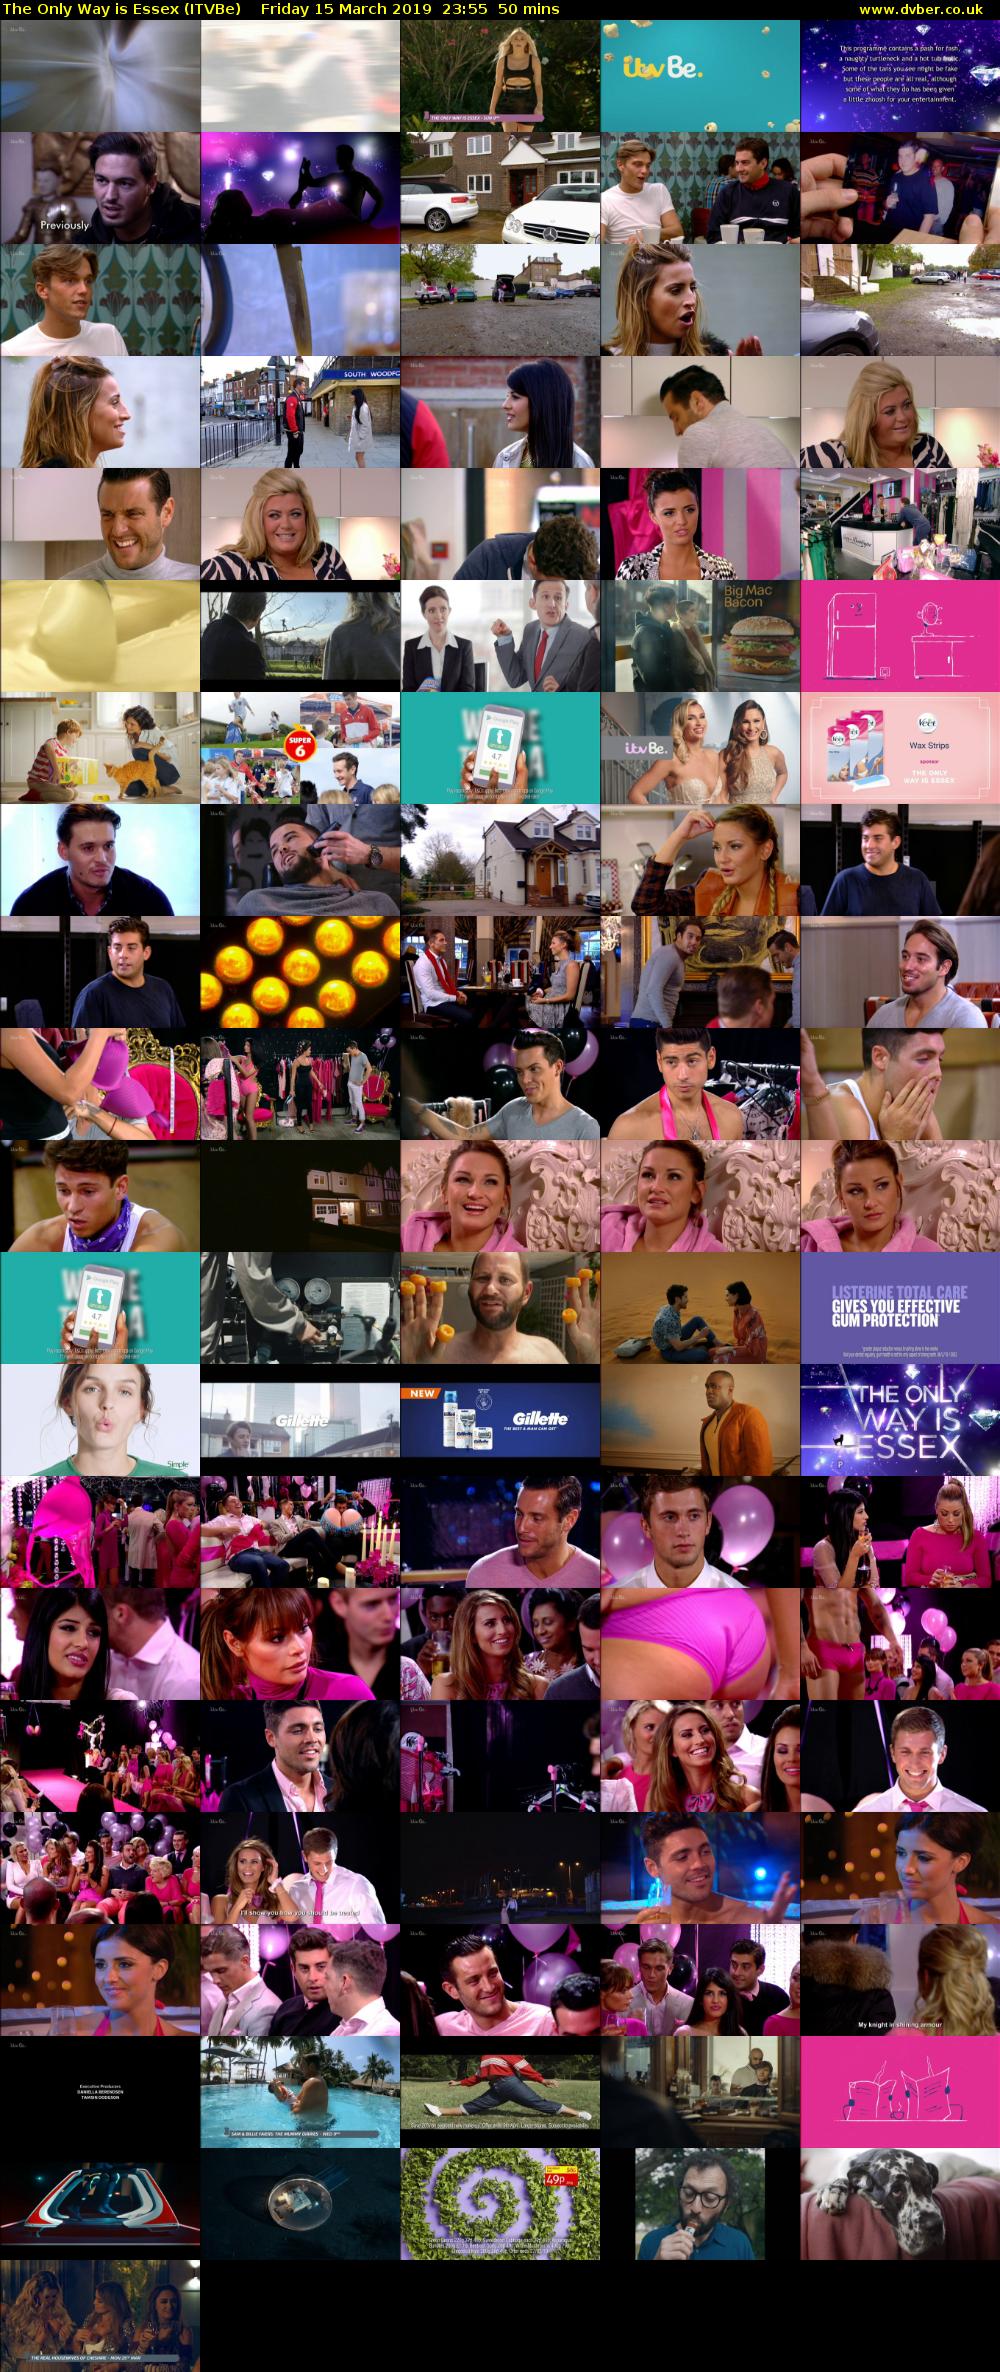 The Only Way is Essex (ITVBe) Friday 15 March 2019 23:55 - 00:45